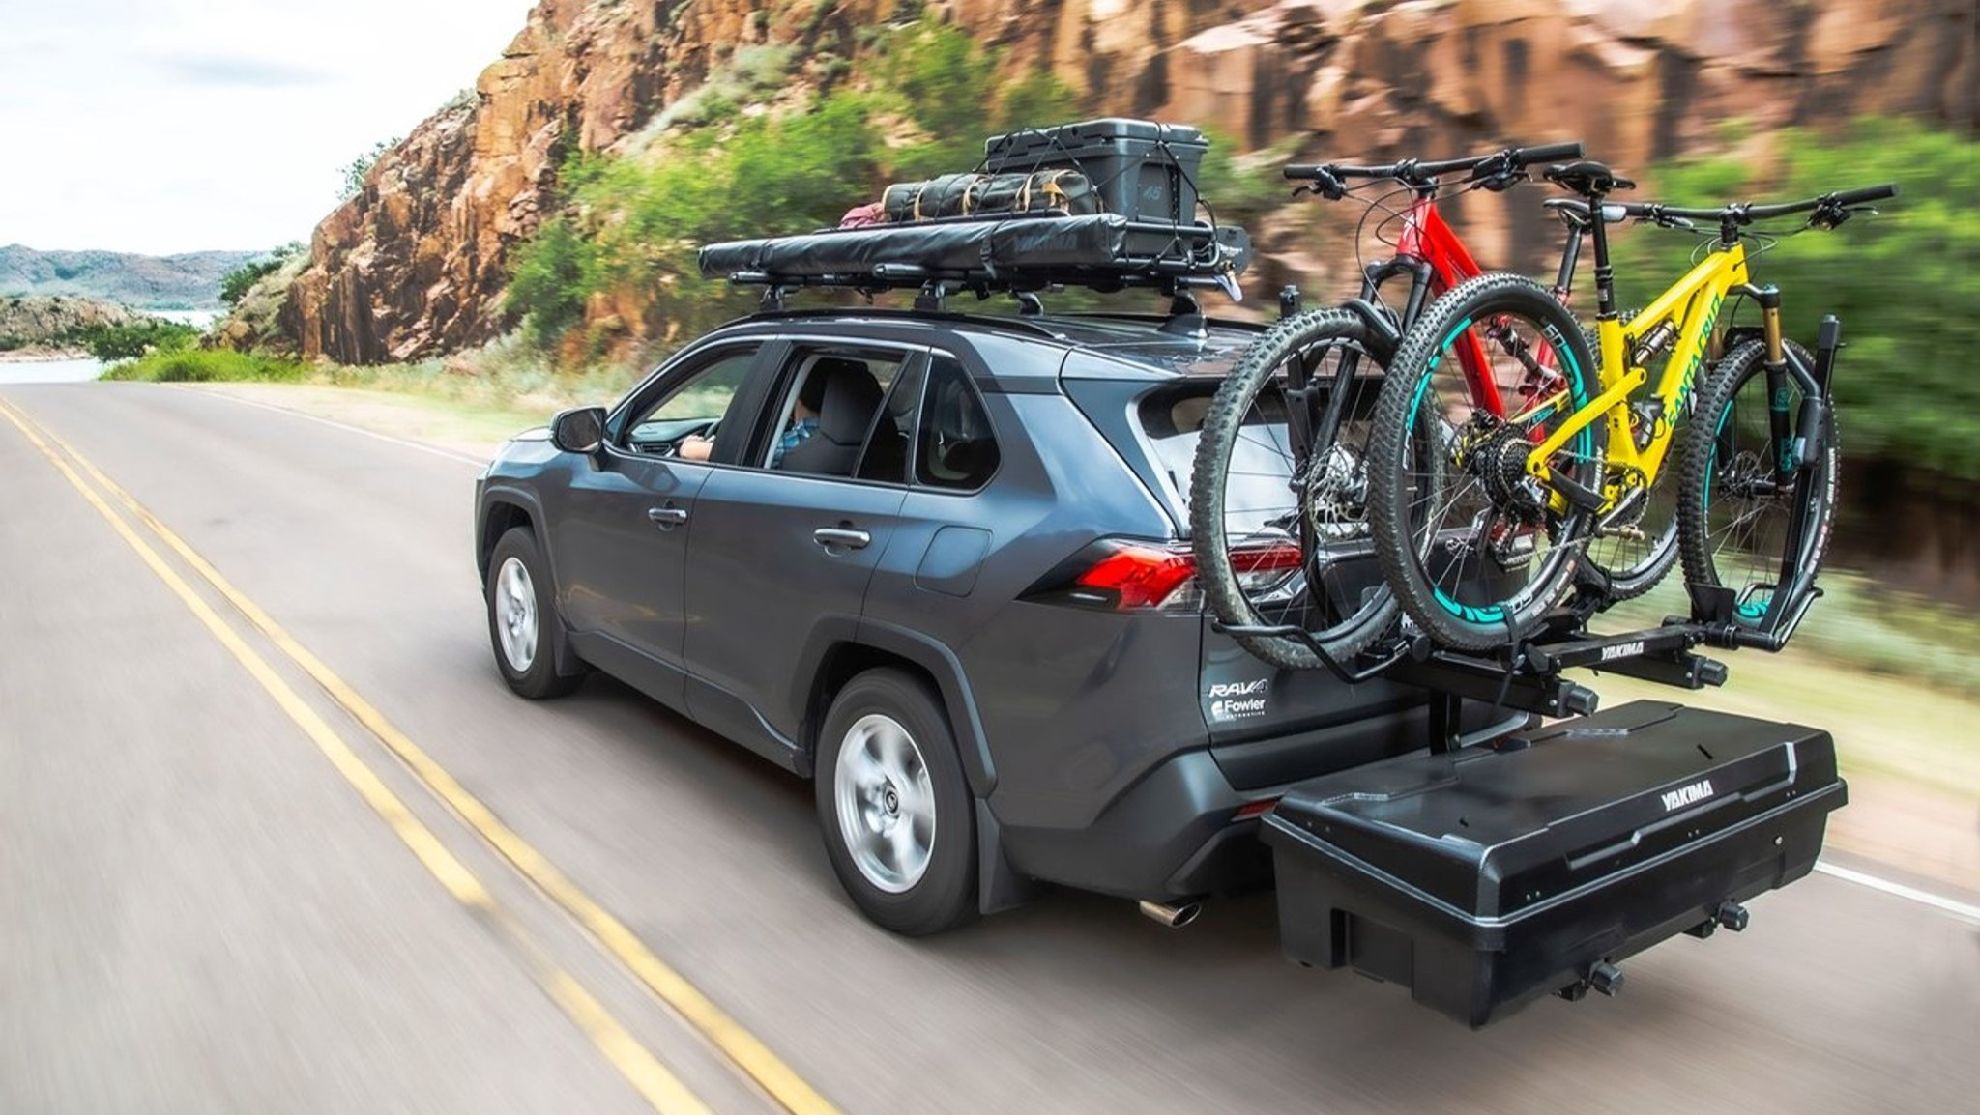 Hitch mounted cargo system loaded up with bikes on an SUV